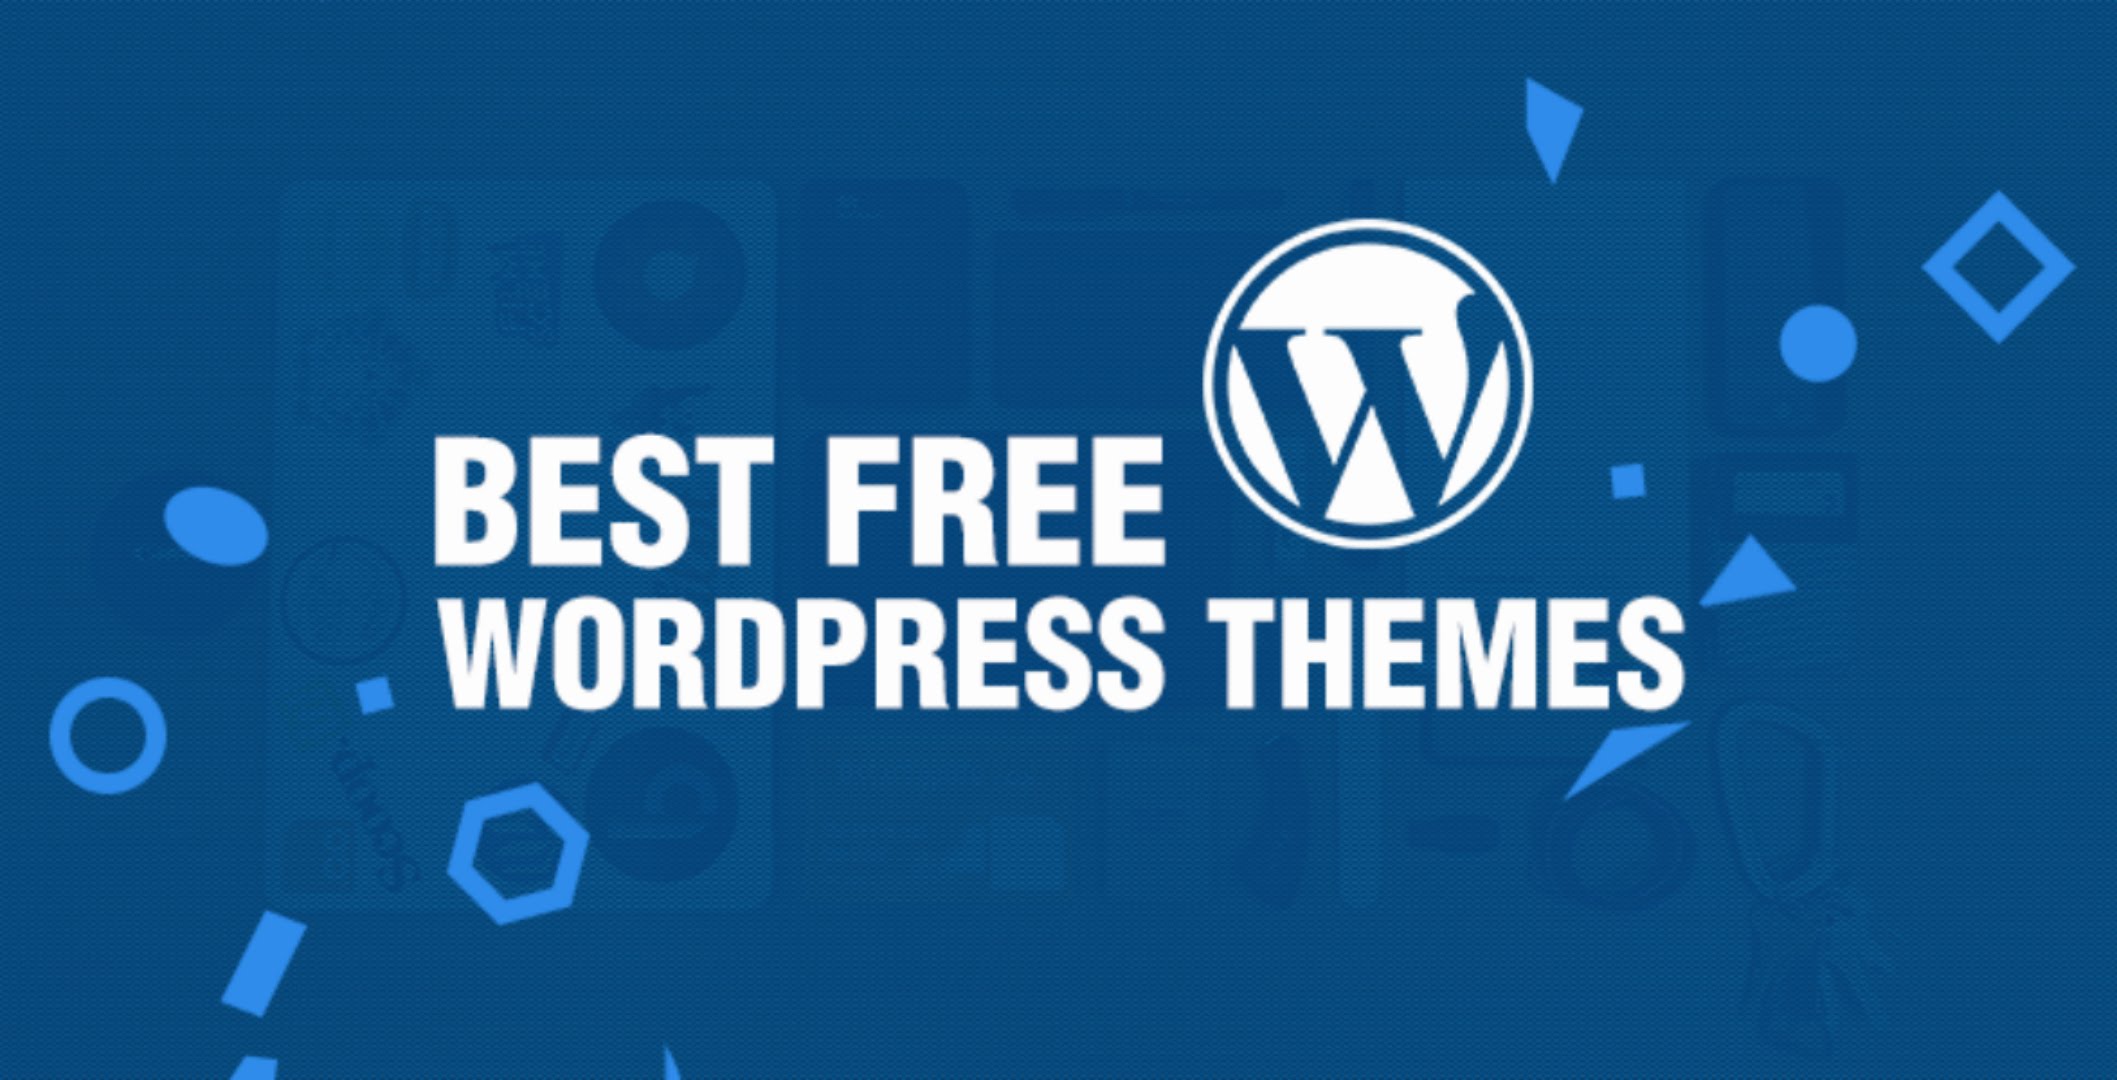 Your Blog Look Professional Use Free WordPress Themes